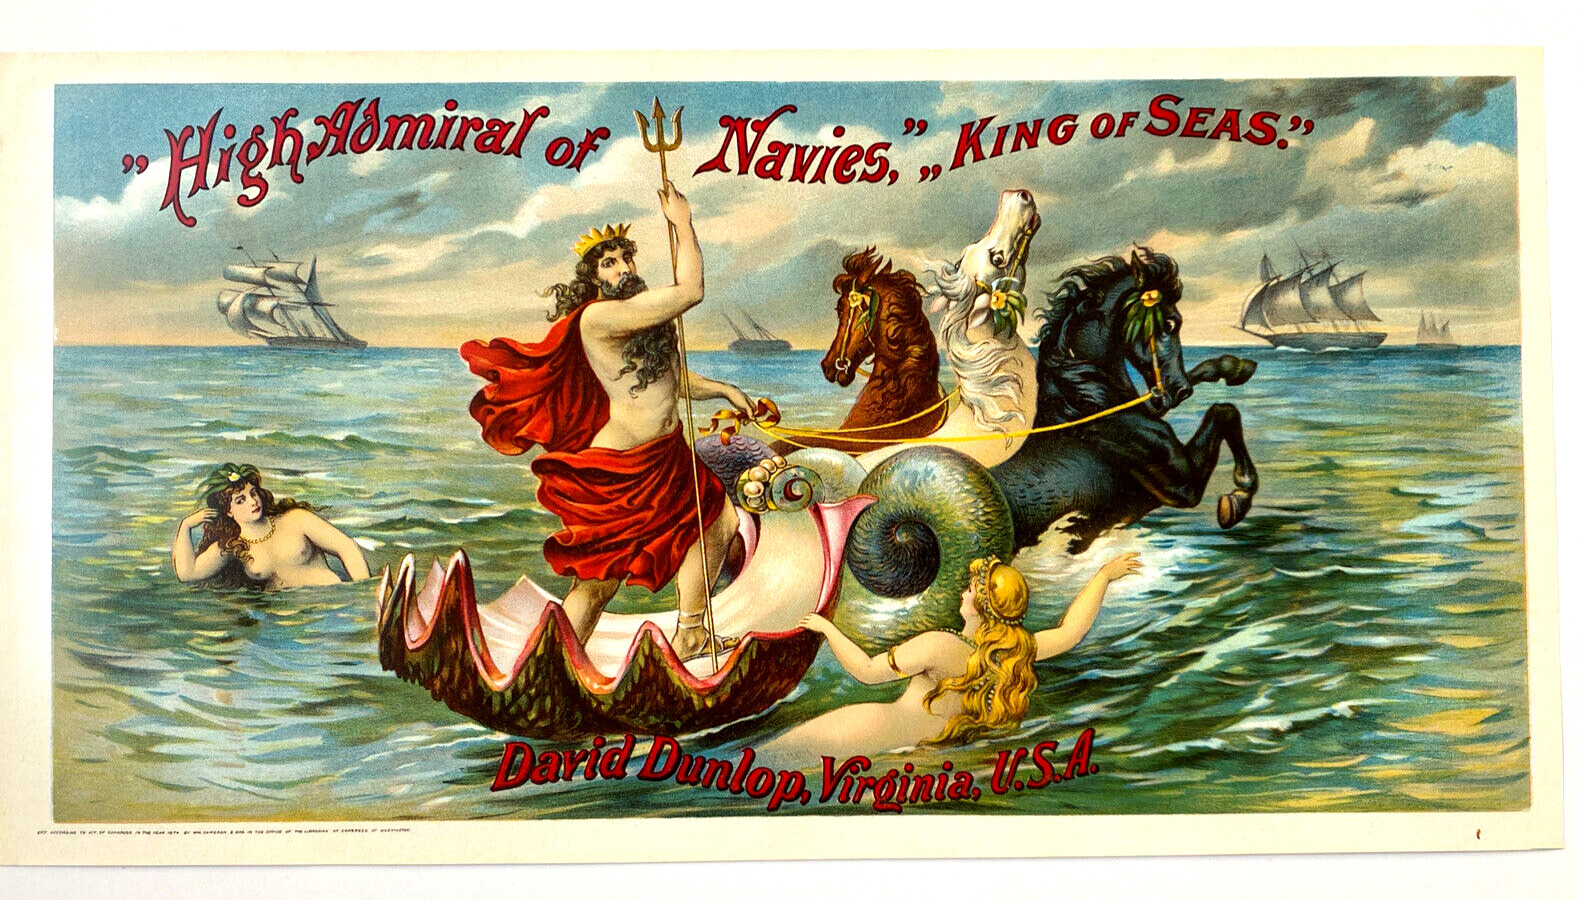 1874 Chromolithography High Admiral of Navies King of Seas Tobacco Label